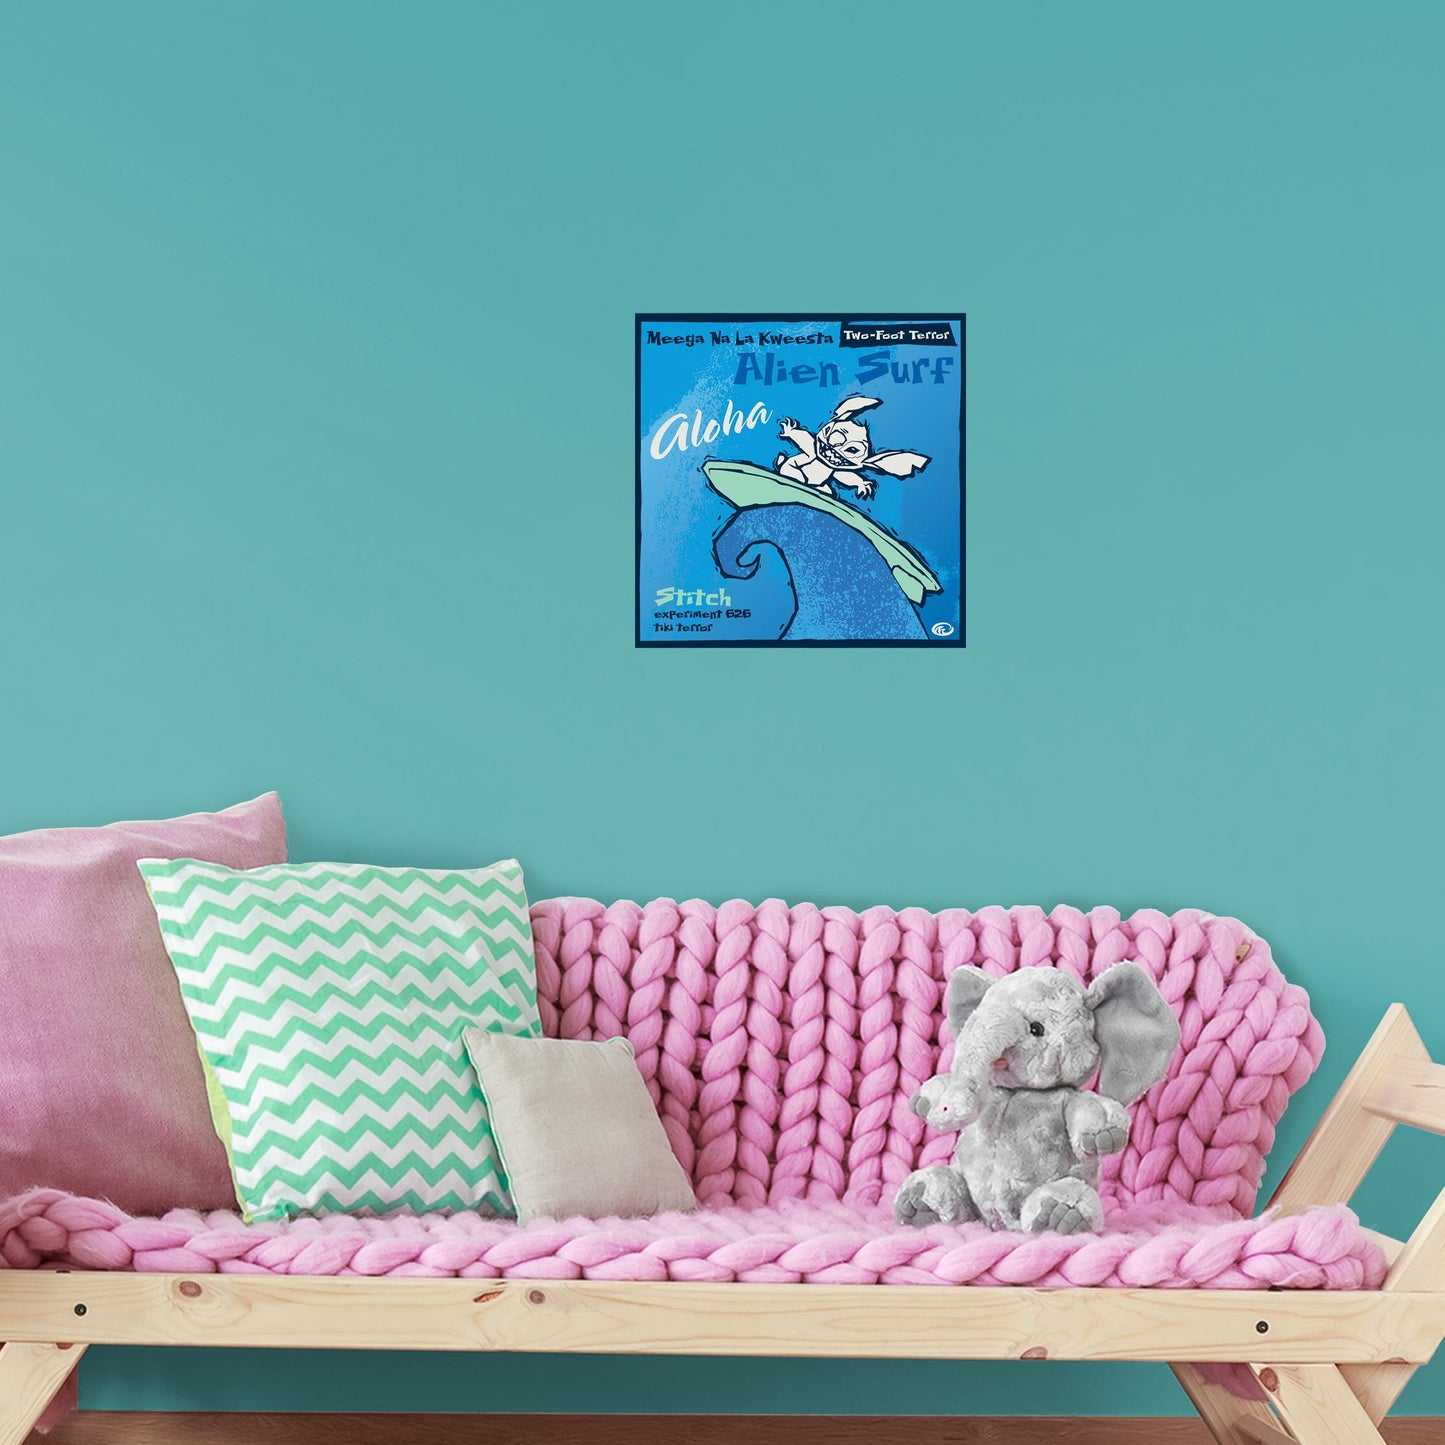 Lilo & Stitch: Stitch Alien Surf Mural - Officially Licensed Disney Removable Adhesive Decal